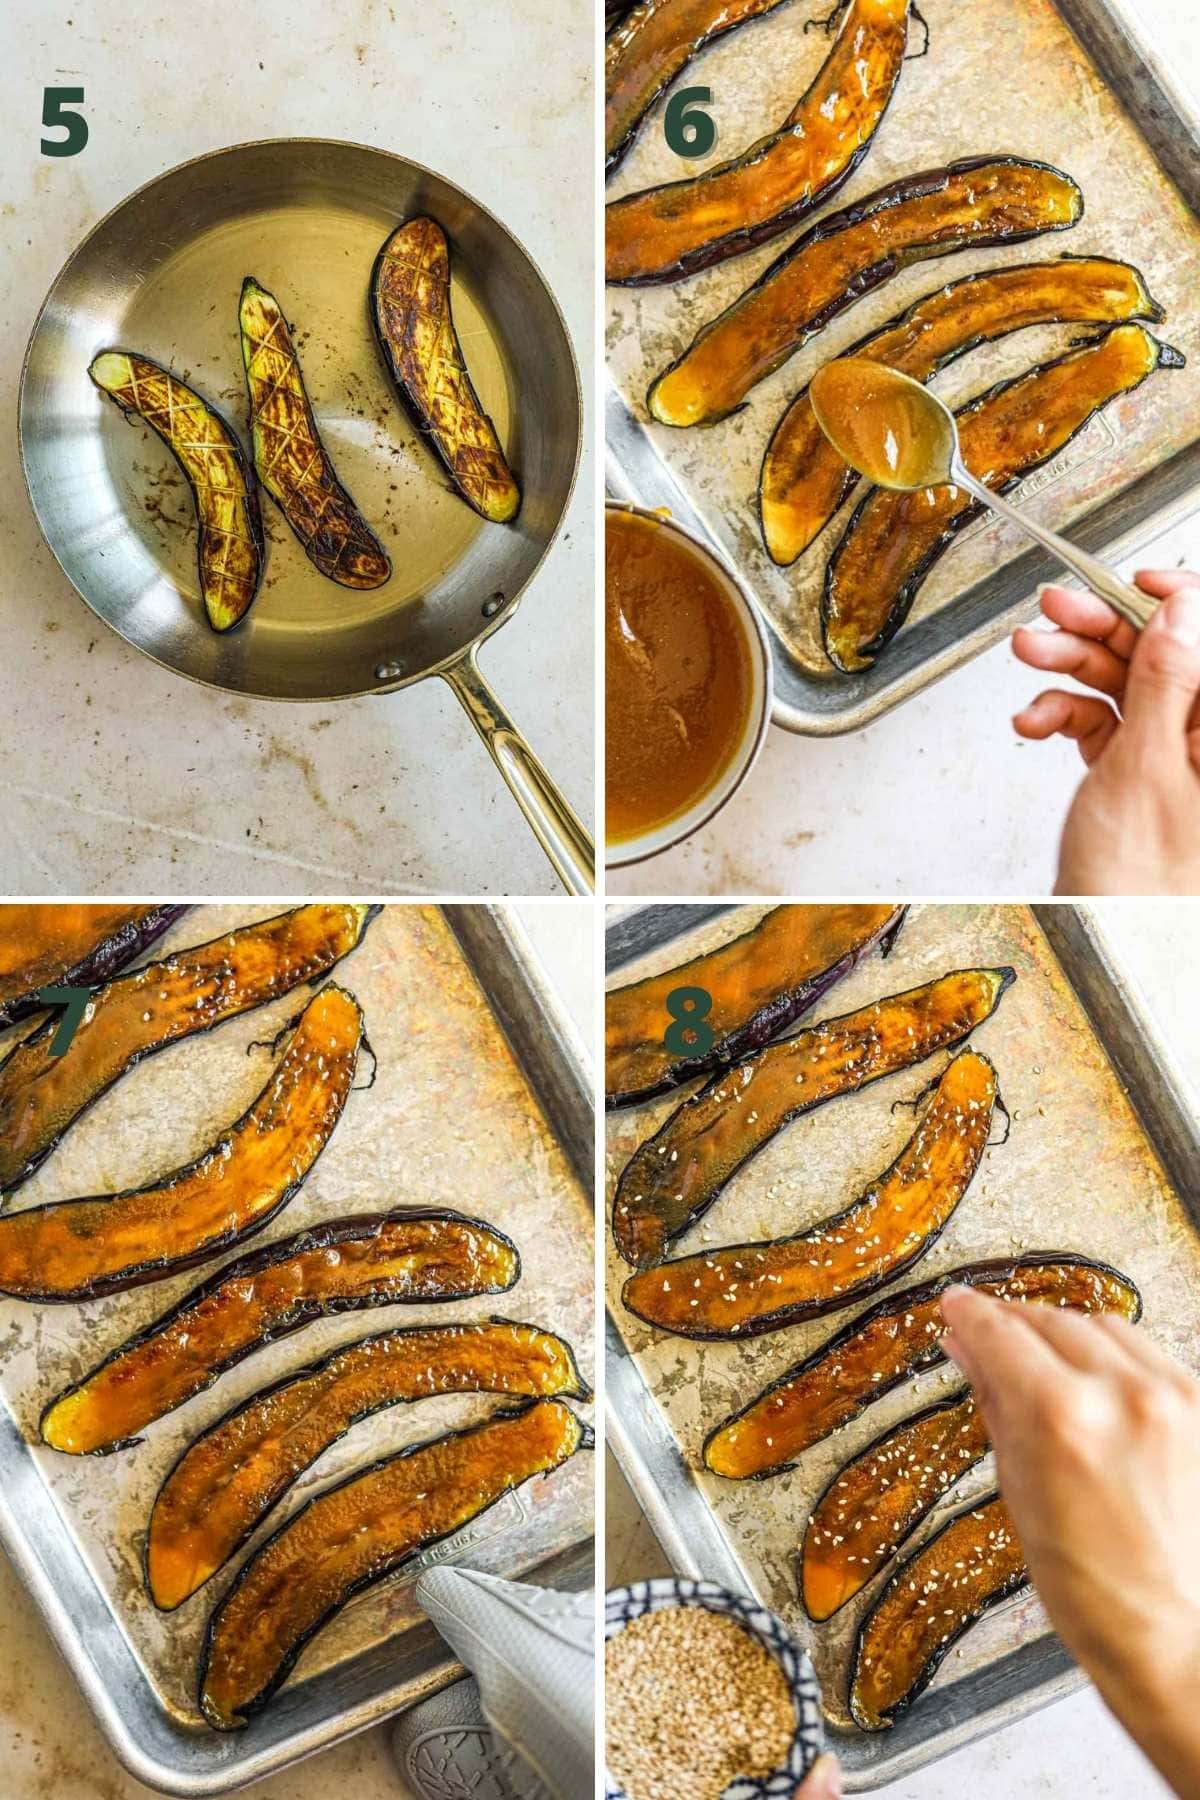 Instructions to make miso glazed Japanese eggplant, including frying the eggplant in a skillet, spreading the glaze on the eggplant, baking it, and sprinkling sesame seeds and green onions on top.